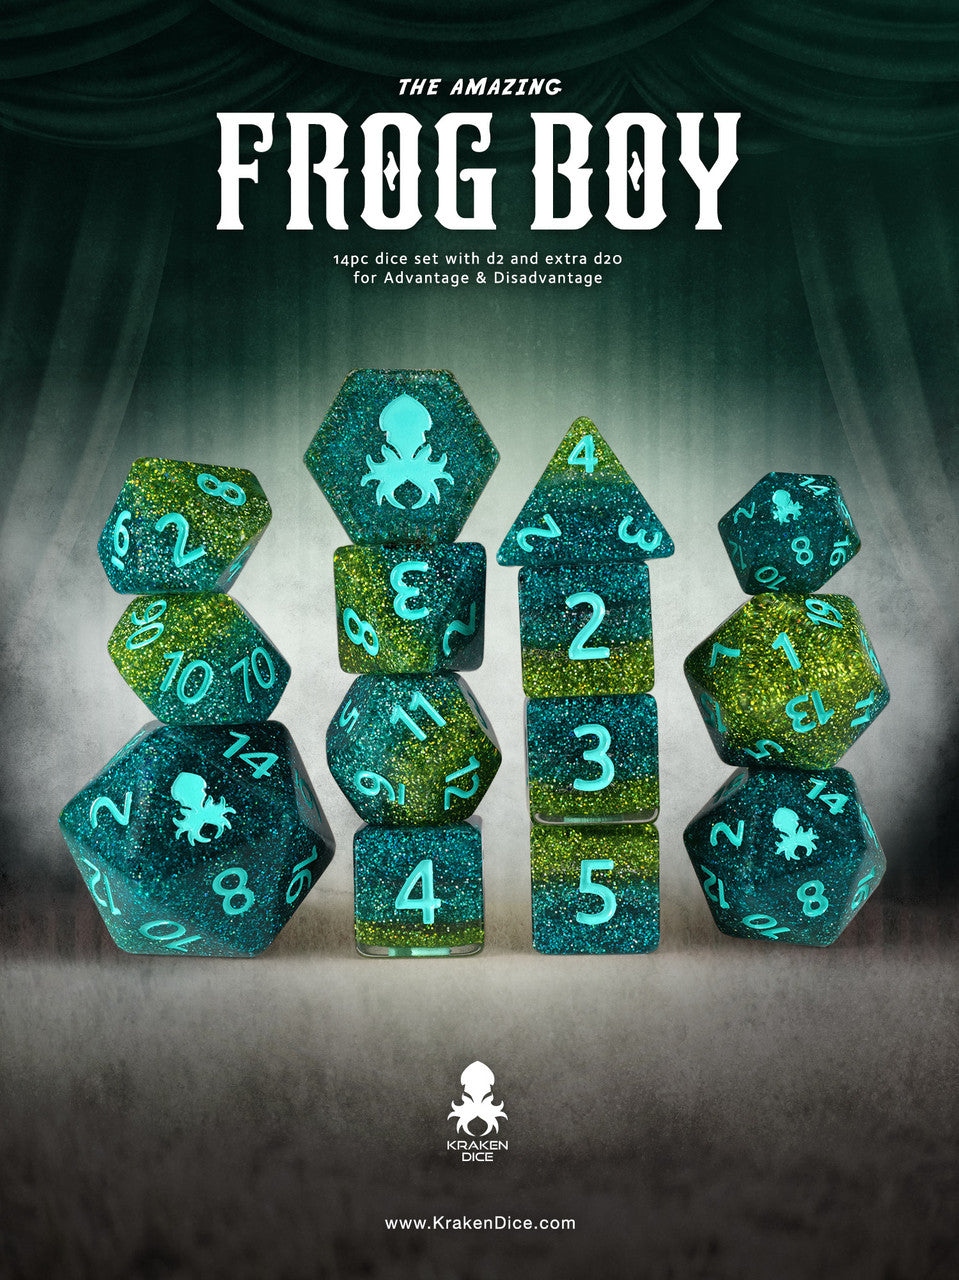 The Amazing Frog Boy 14pc Dice Set Inked in Teal